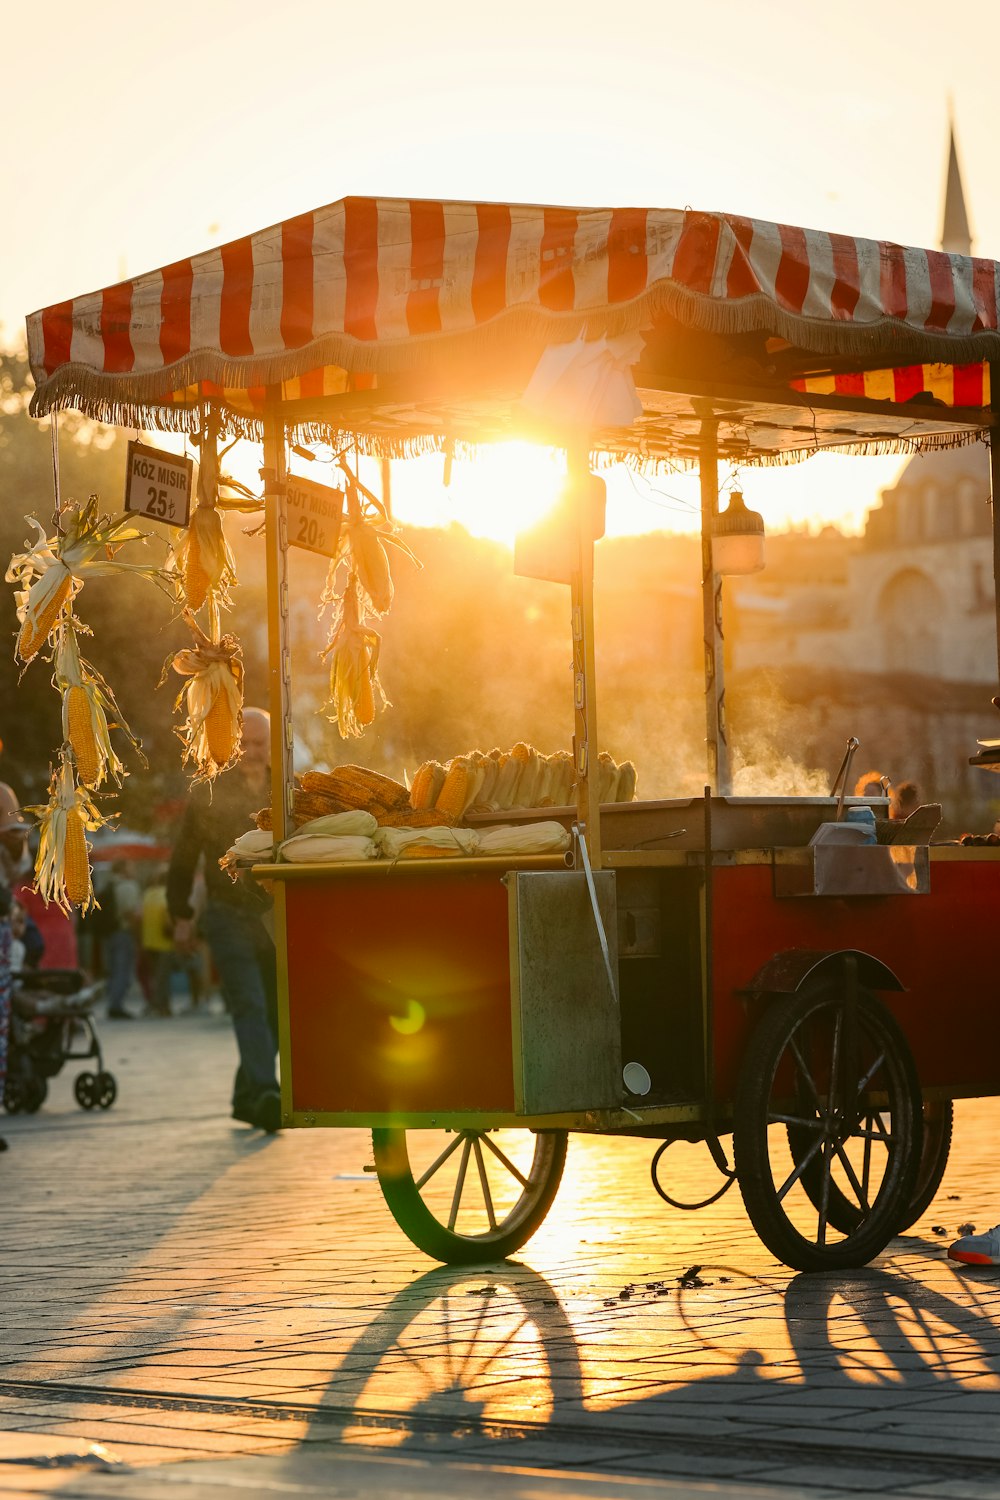 a cart with food on the street at sunset